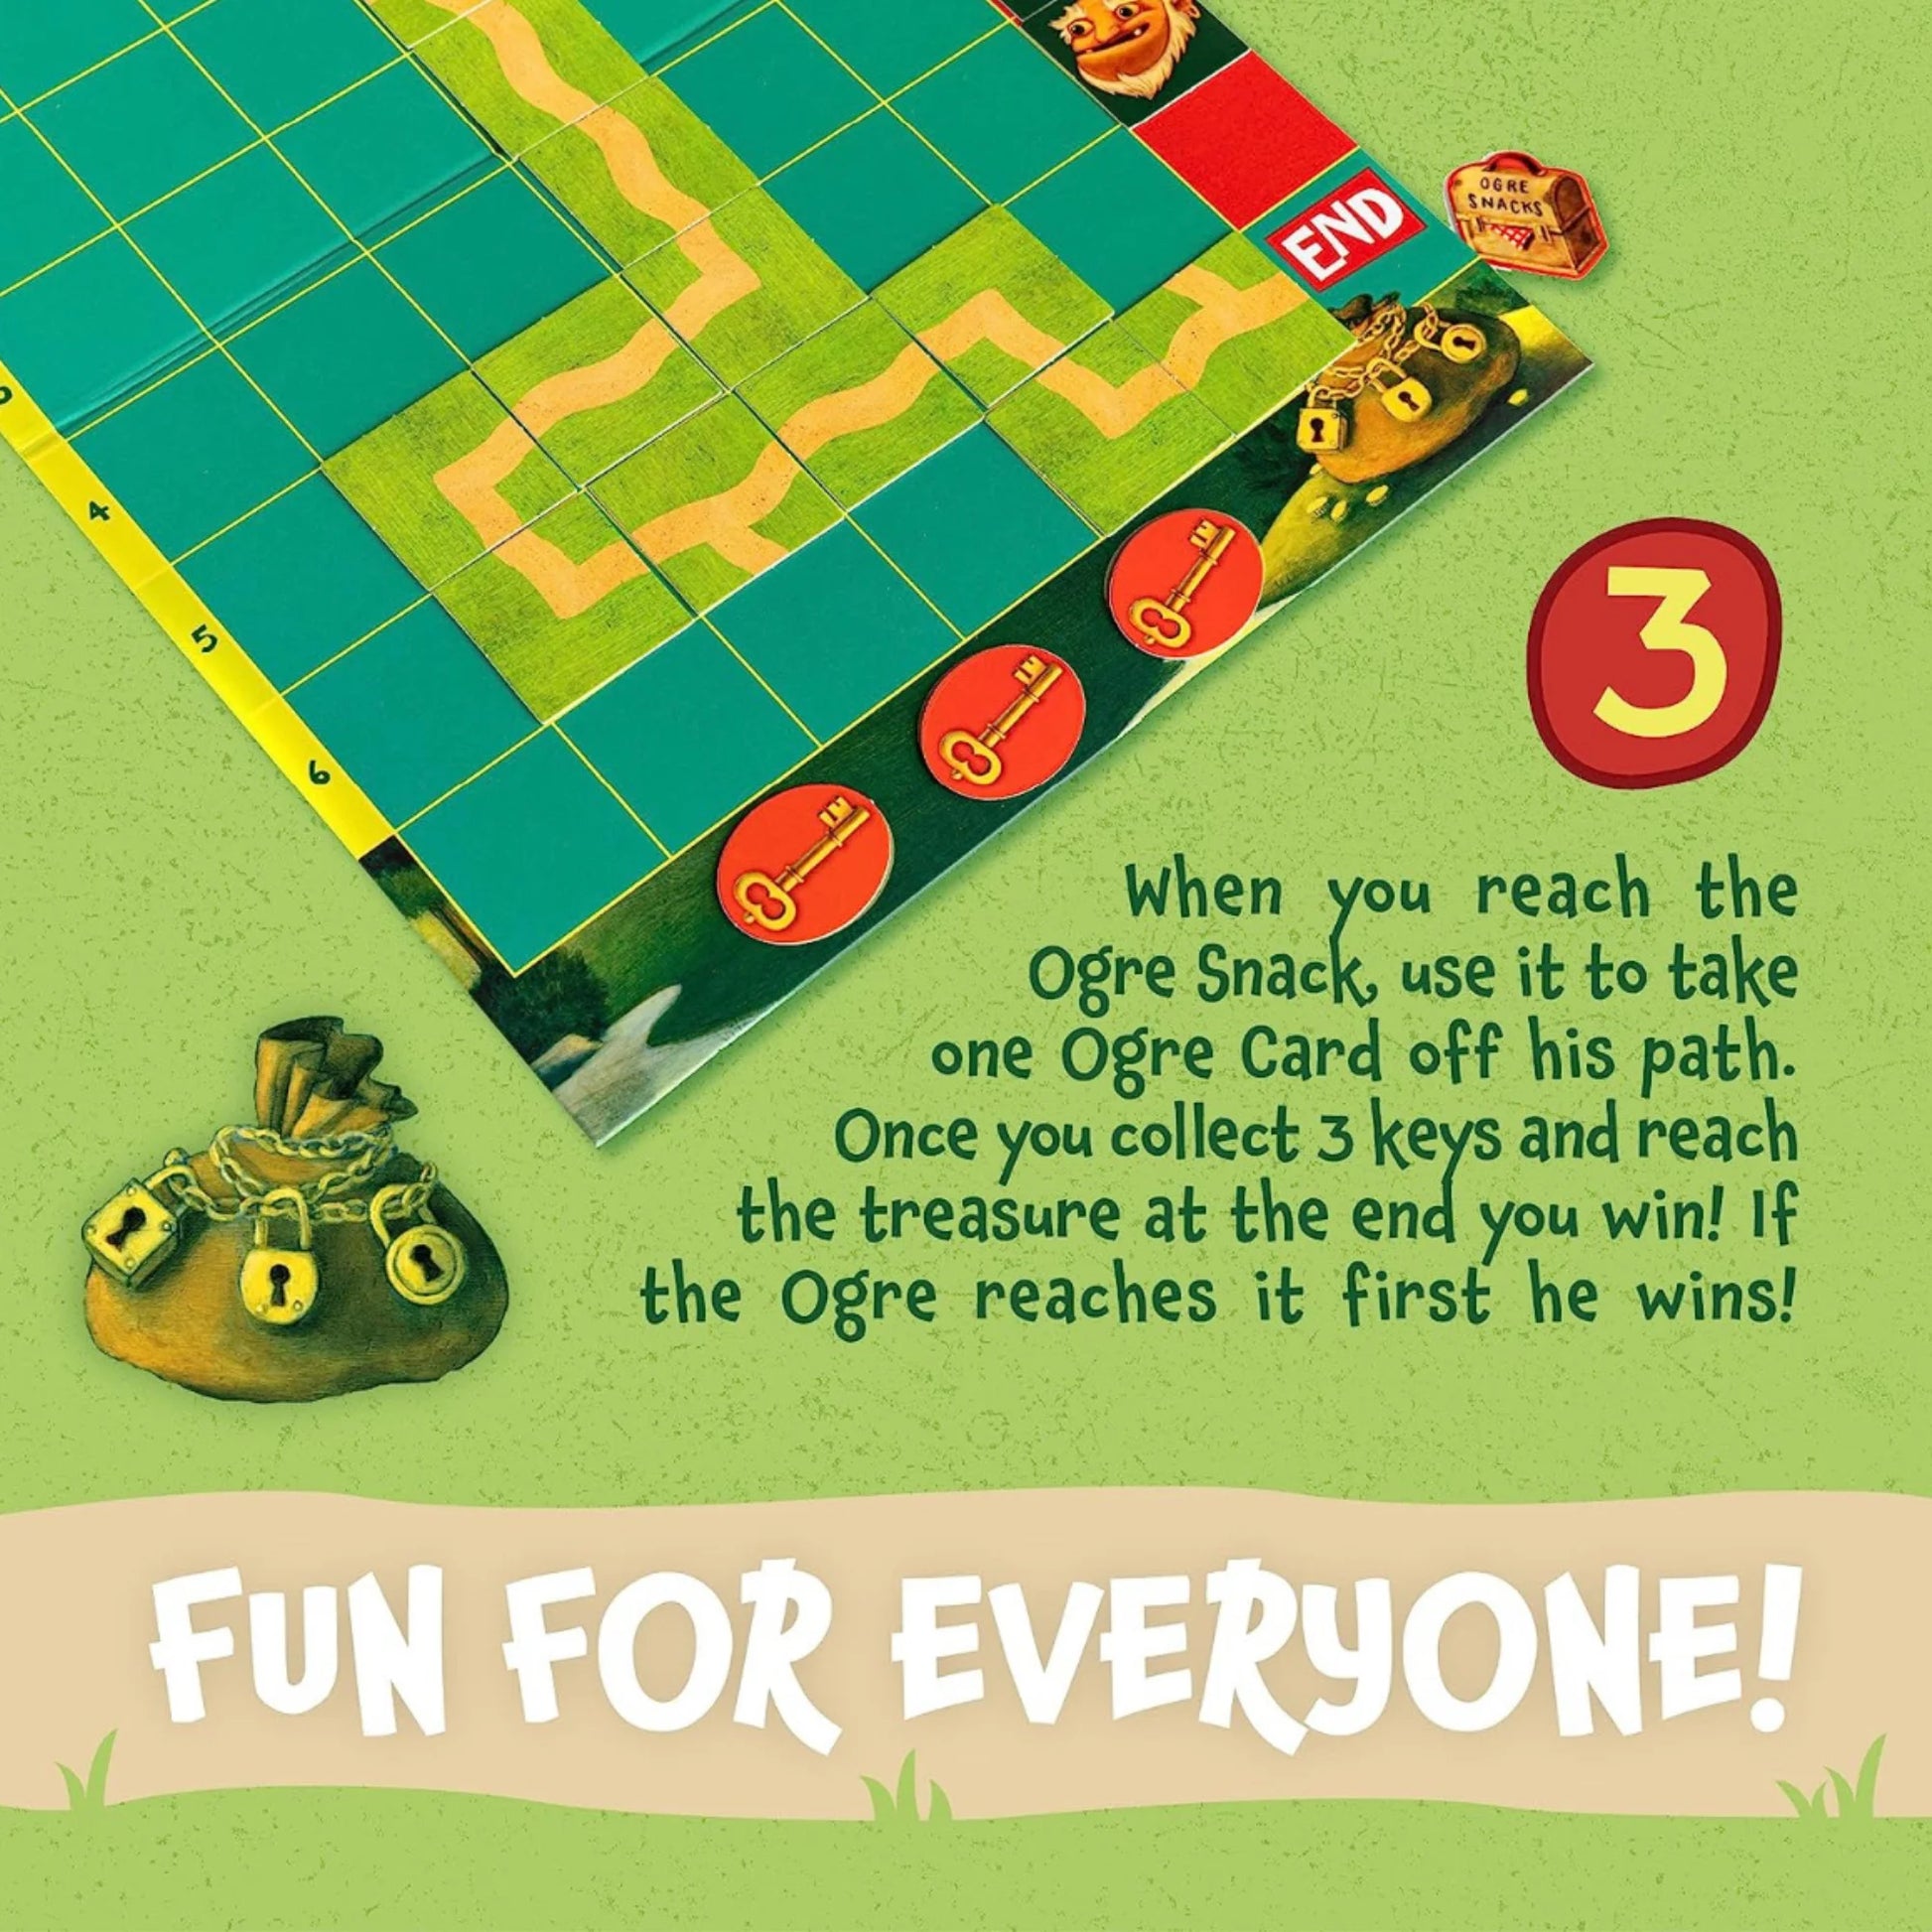 Race to the Treasure Board Game for Kids by Peaceable Kingdom - Alder & Alouette